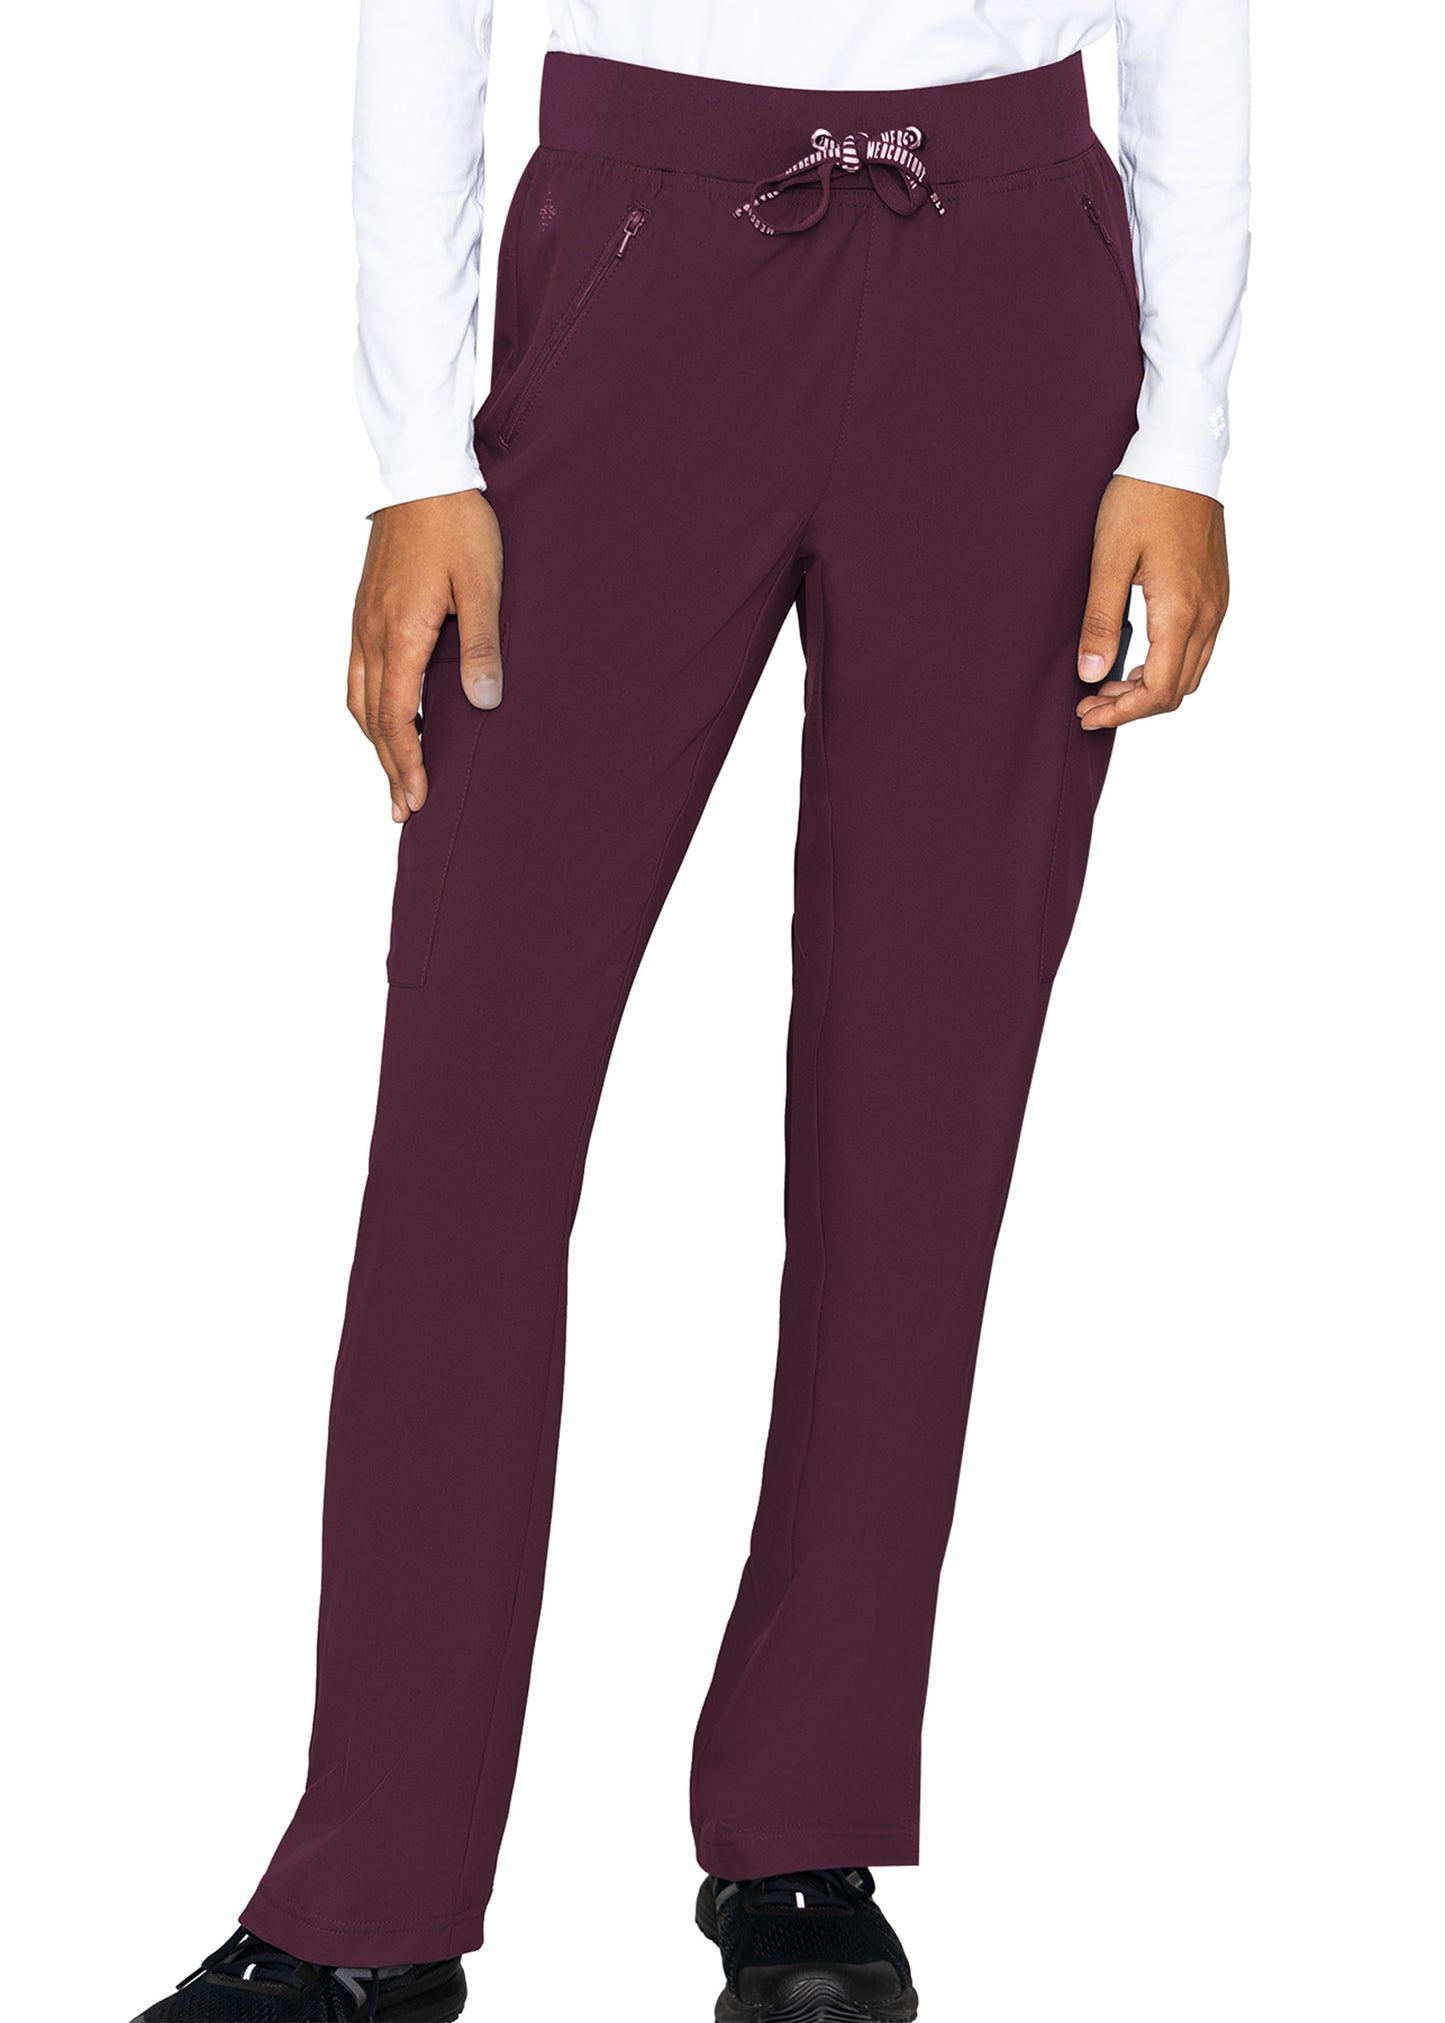 Med Couture-Insight Zipper Pant 2702